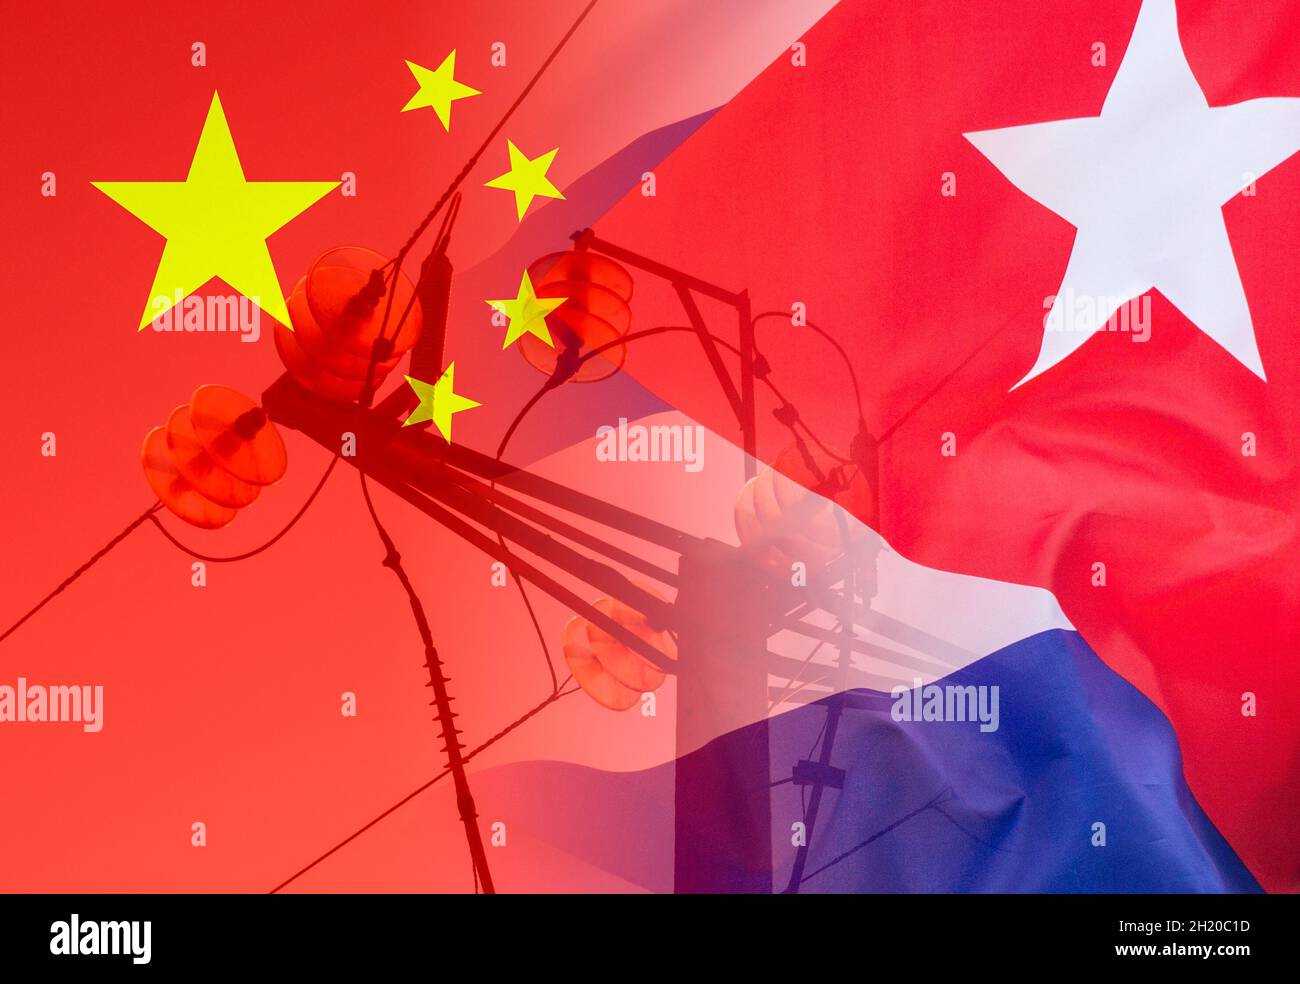 Flags of China and Cuba with electricity power lines overlayed. Cuba has signed an energy pact with China. Stock Photo